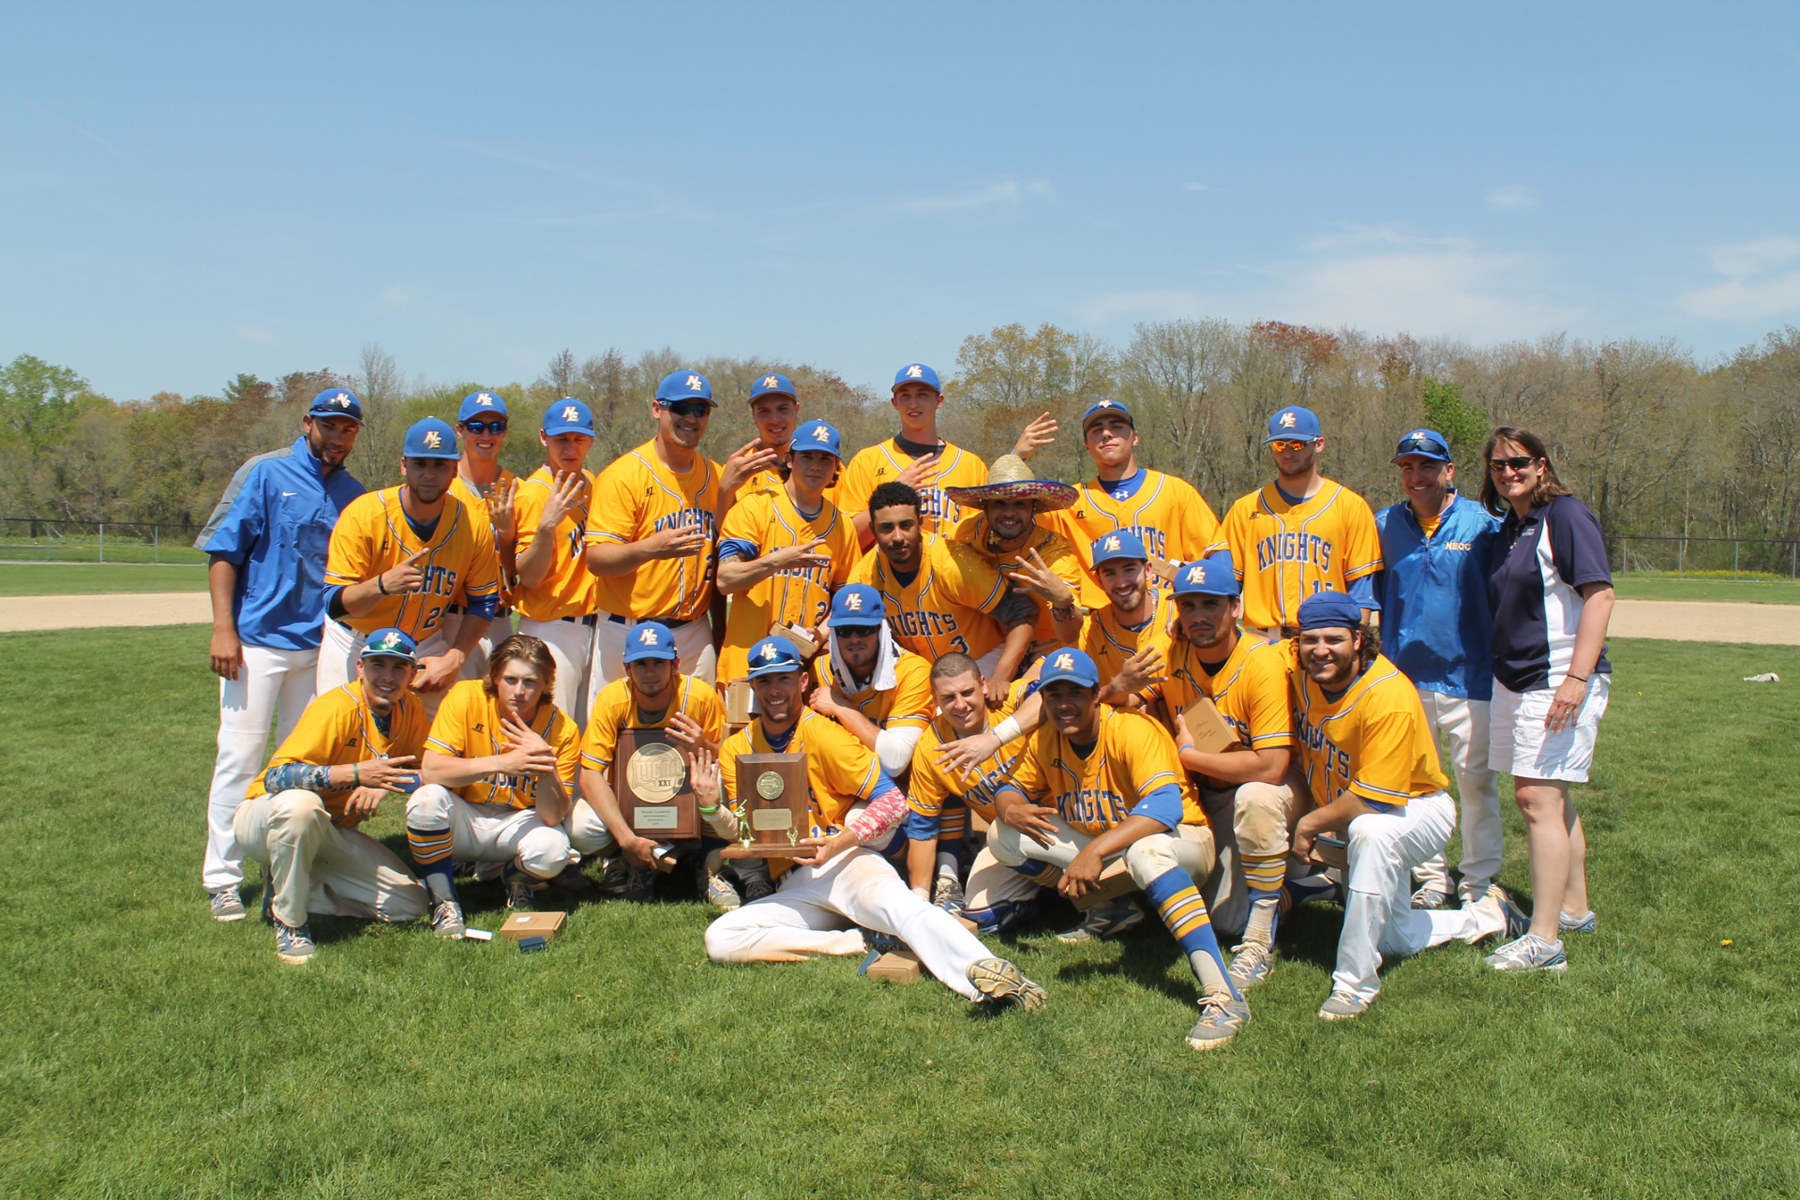 NECC Baseball Team Headed to World Series for Fourth Year in a Row